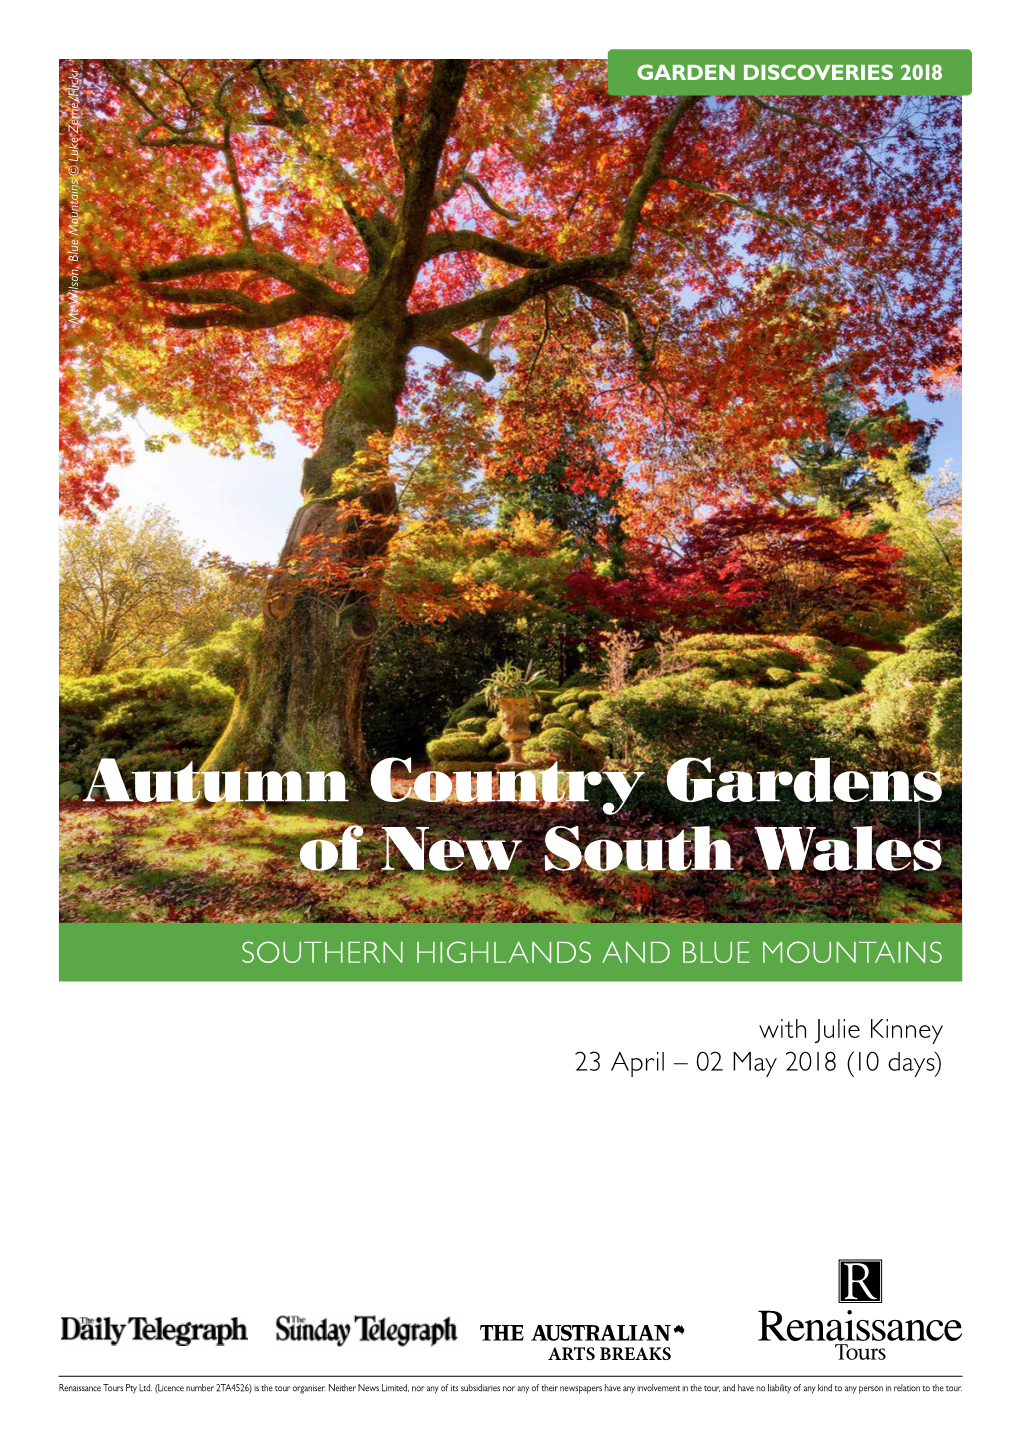 Autumn Country Gardens of New South Wales